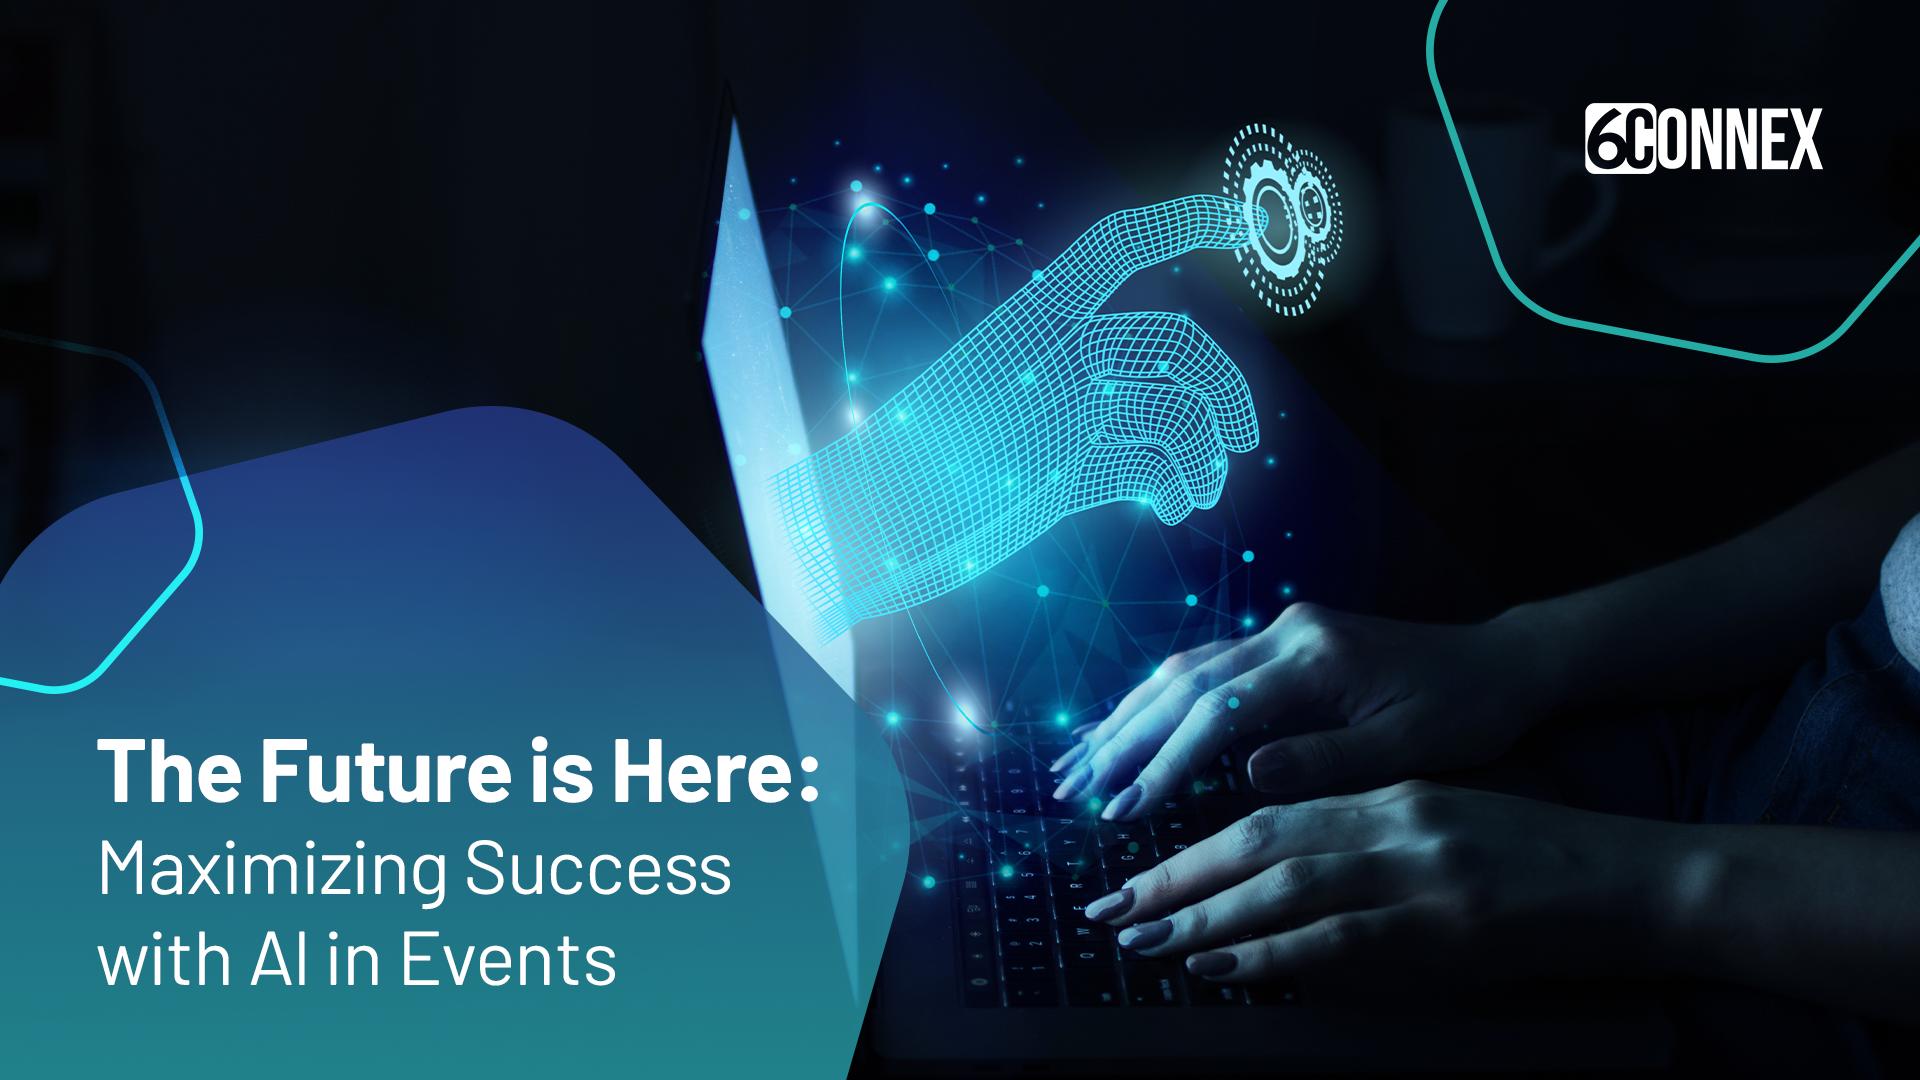 The Future is Here: Maximizing Success with AI in Events